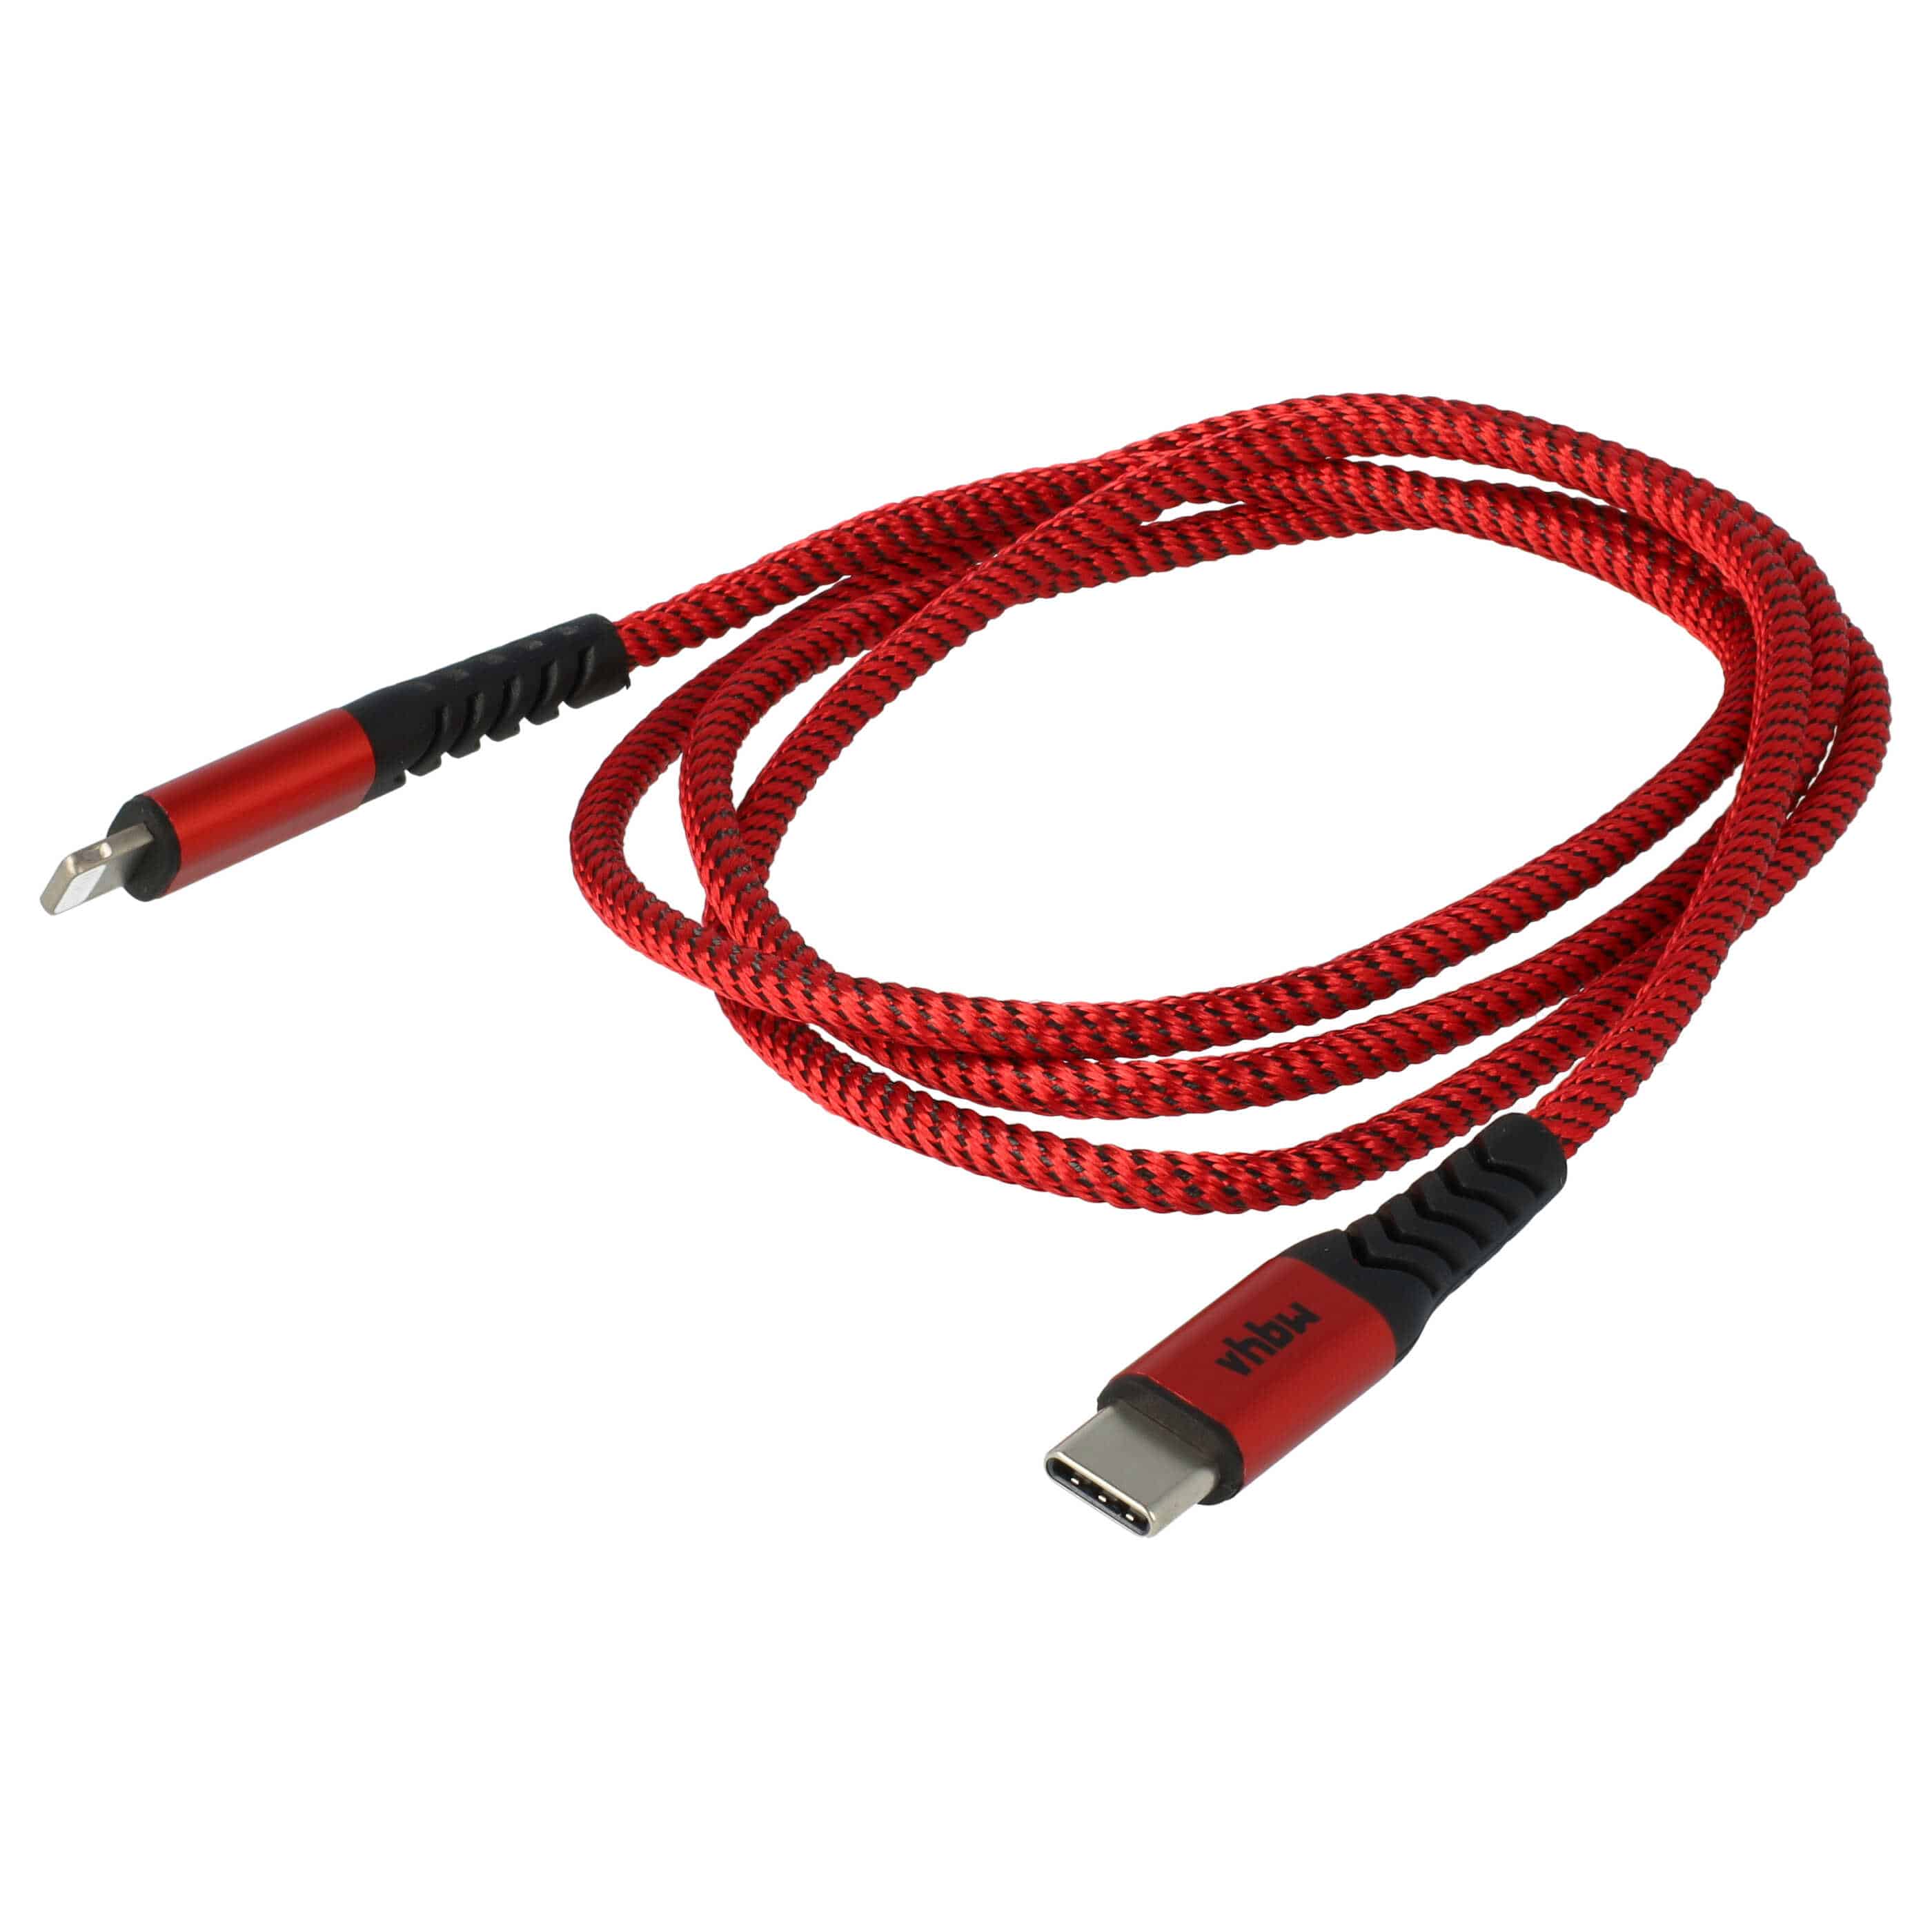 Lightning Cable - USB C, Thunderbolt 3 suitable for Retina, 12" 2015-2017 Apple MacBook Apple iOS - Red Black,